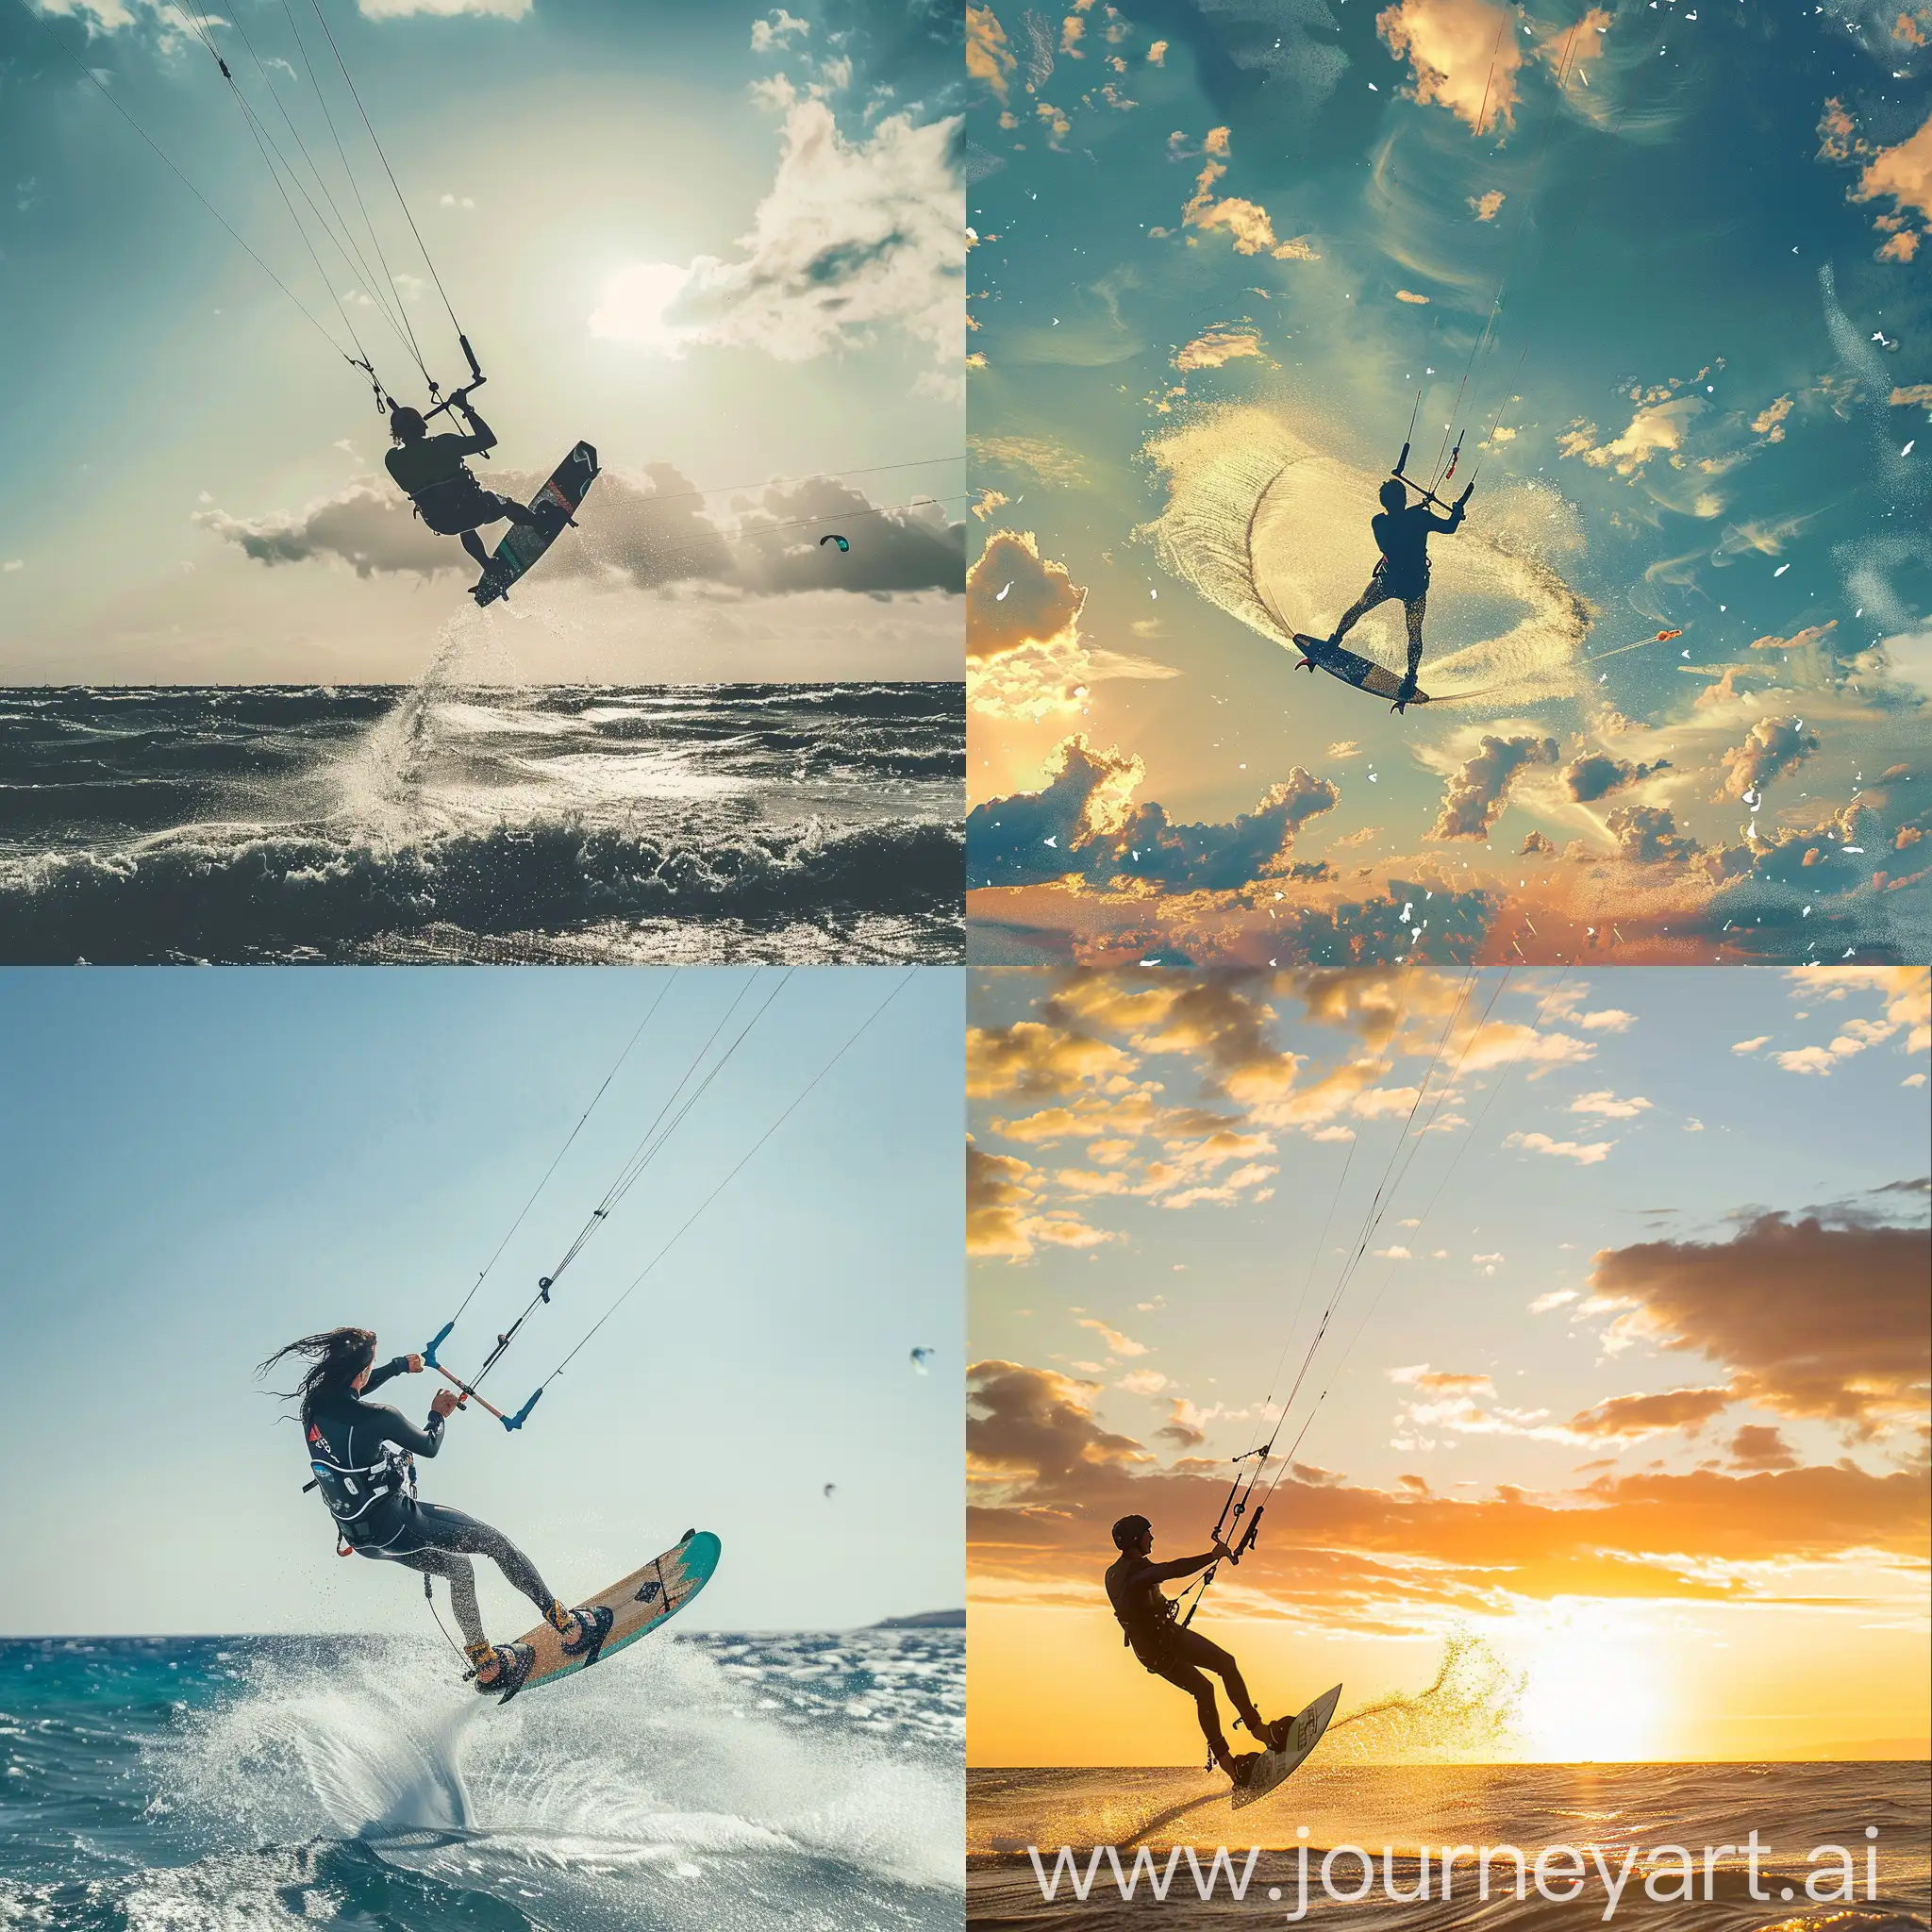 create an image with a person doing kitesurf